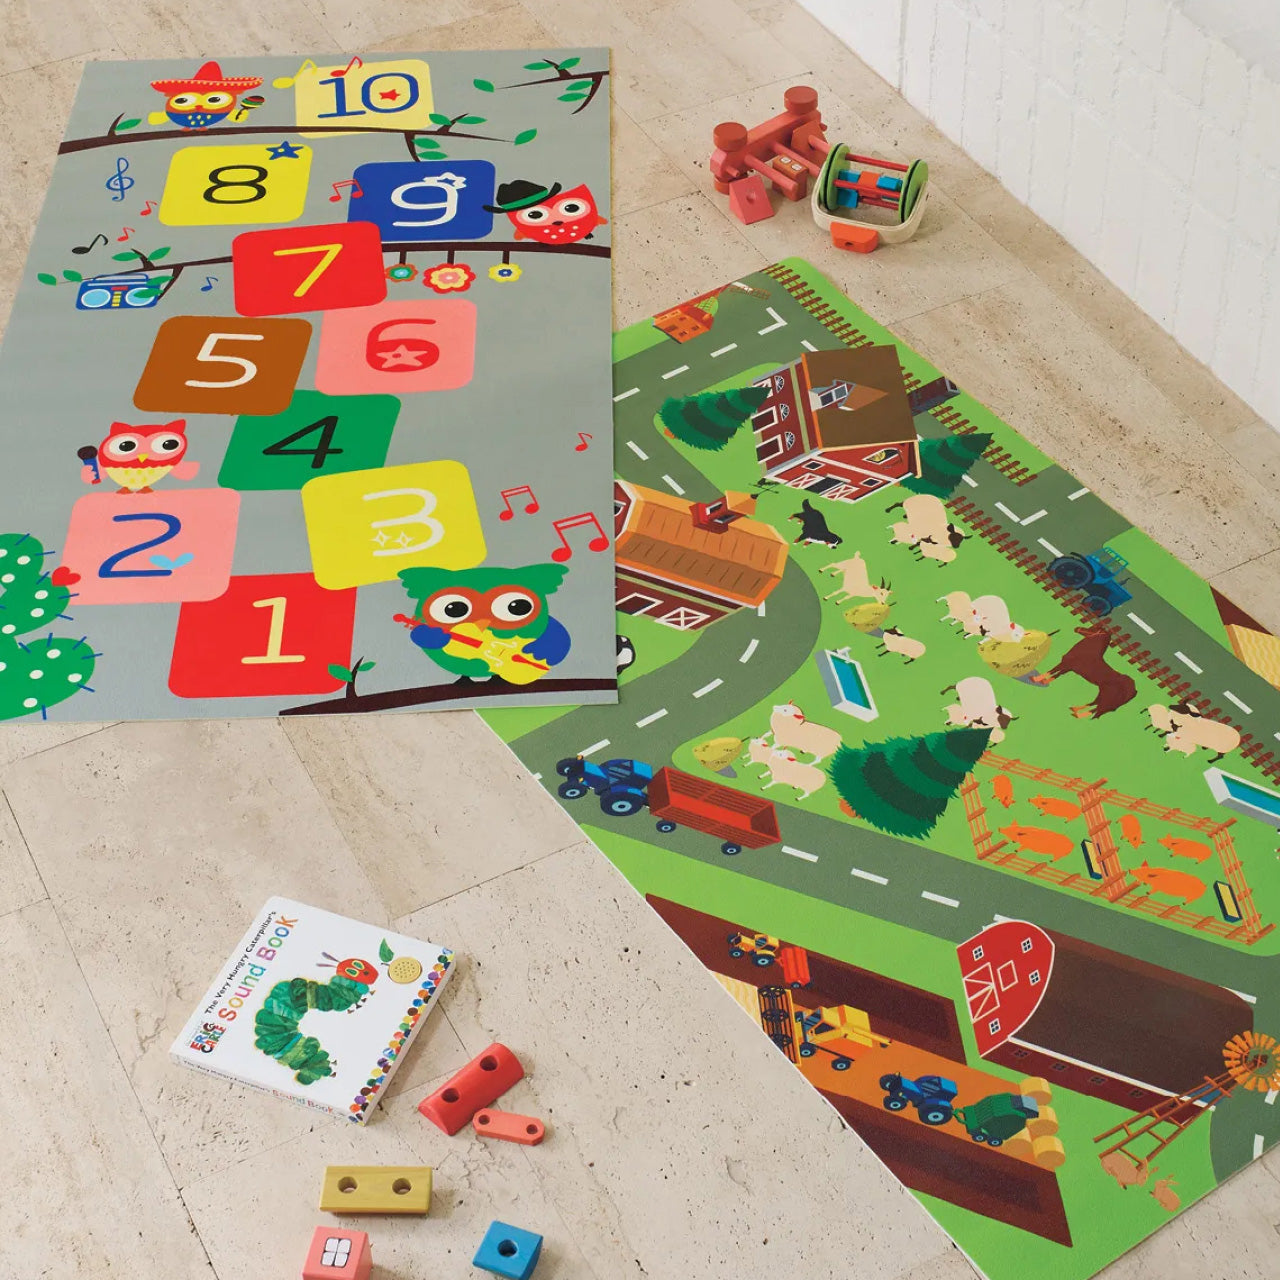 Group shot of Kids Playmats on floor with toys